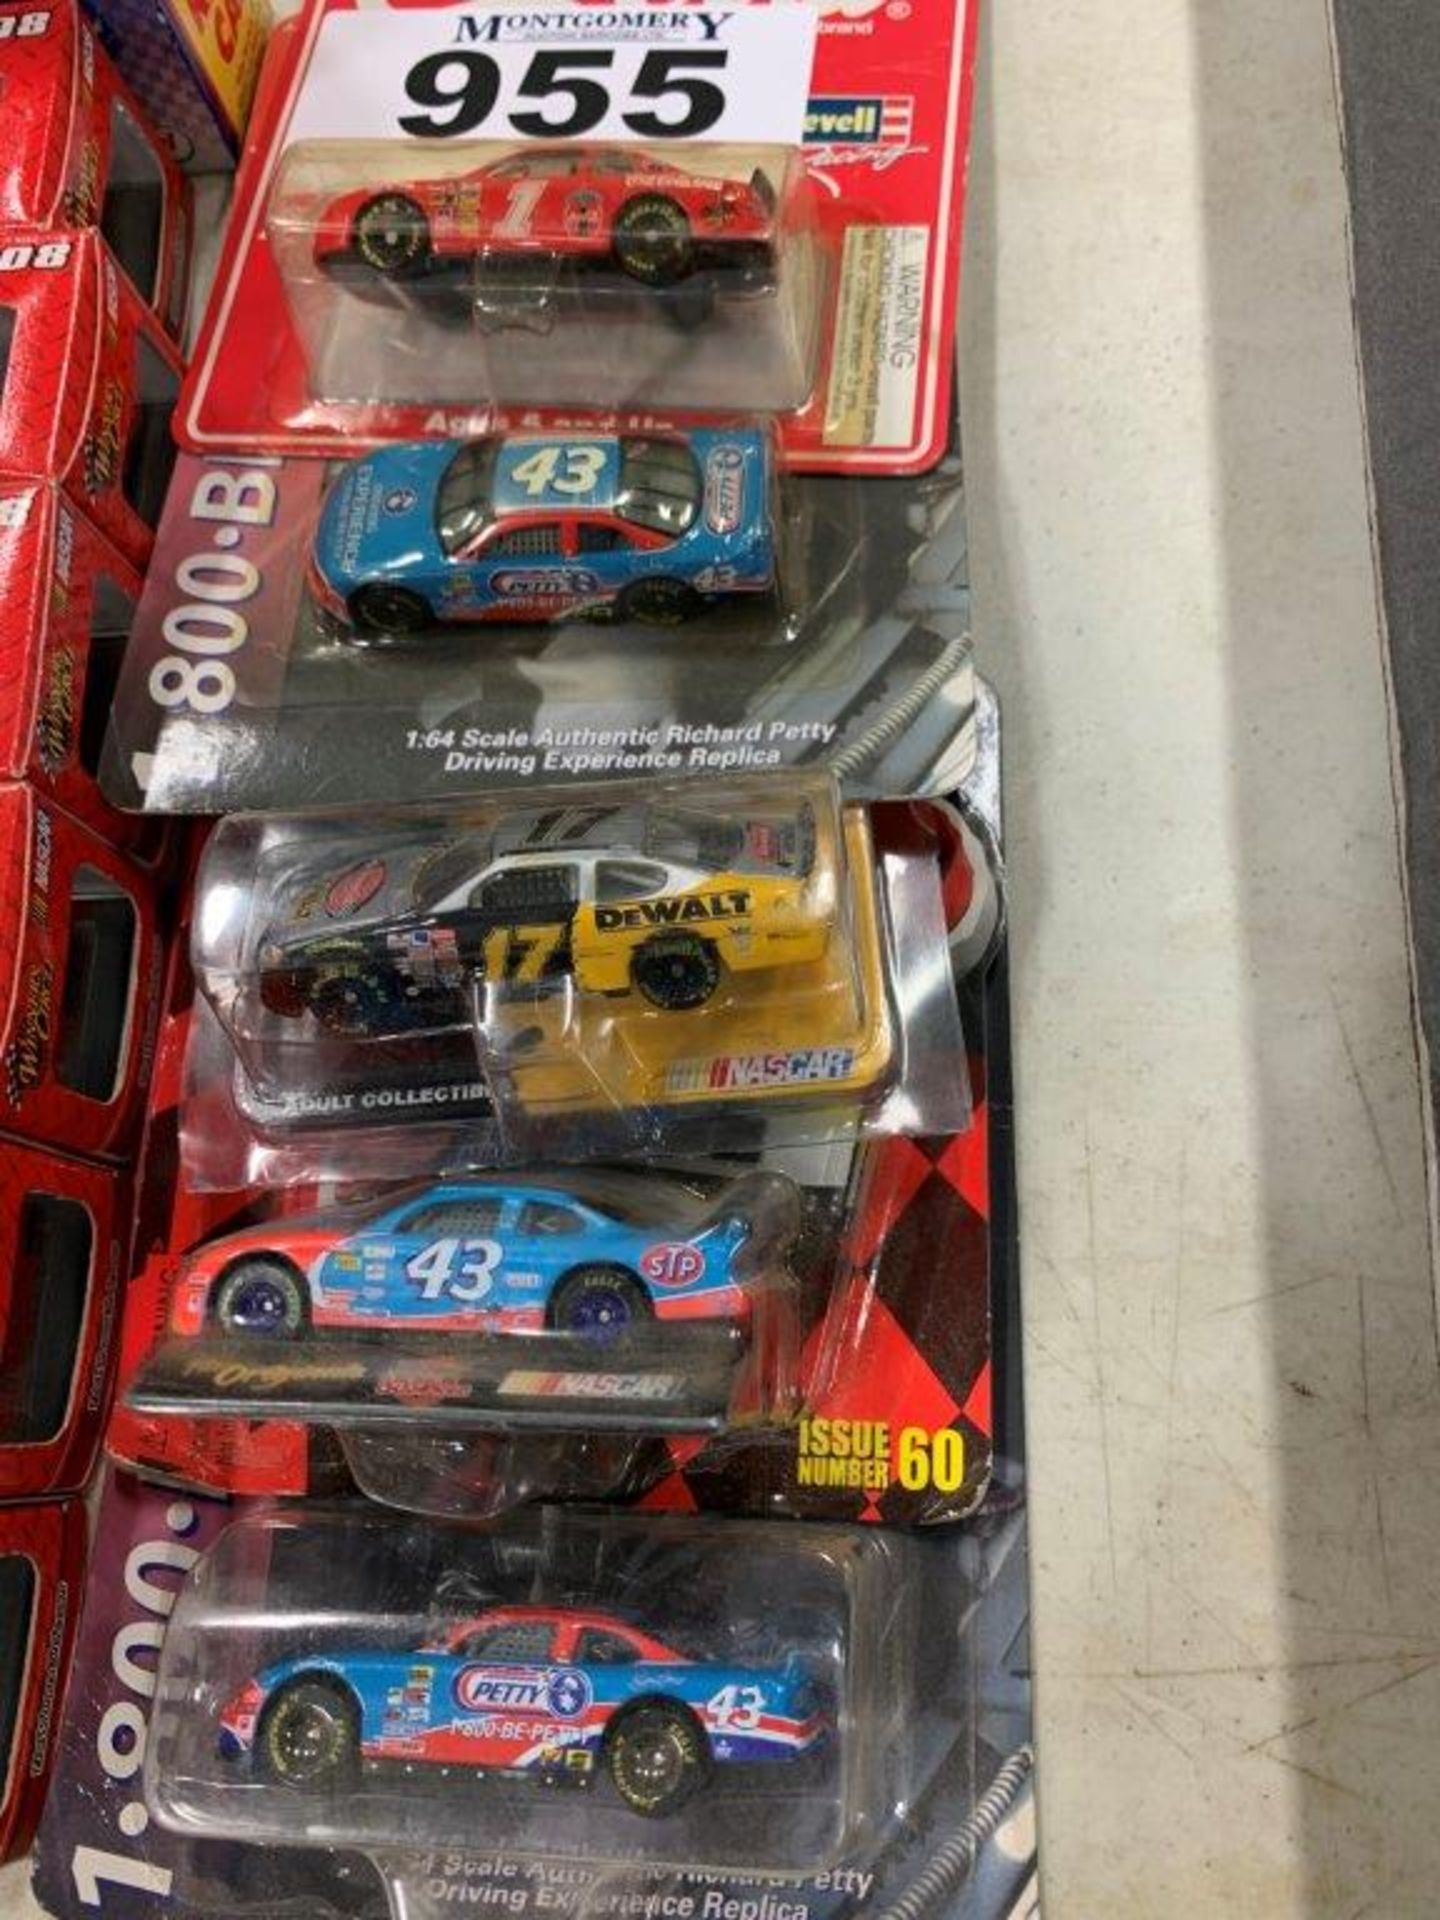 ASSORTED WINNERS CIRCLE DIE CAST RELICAS - Image 4 of 4